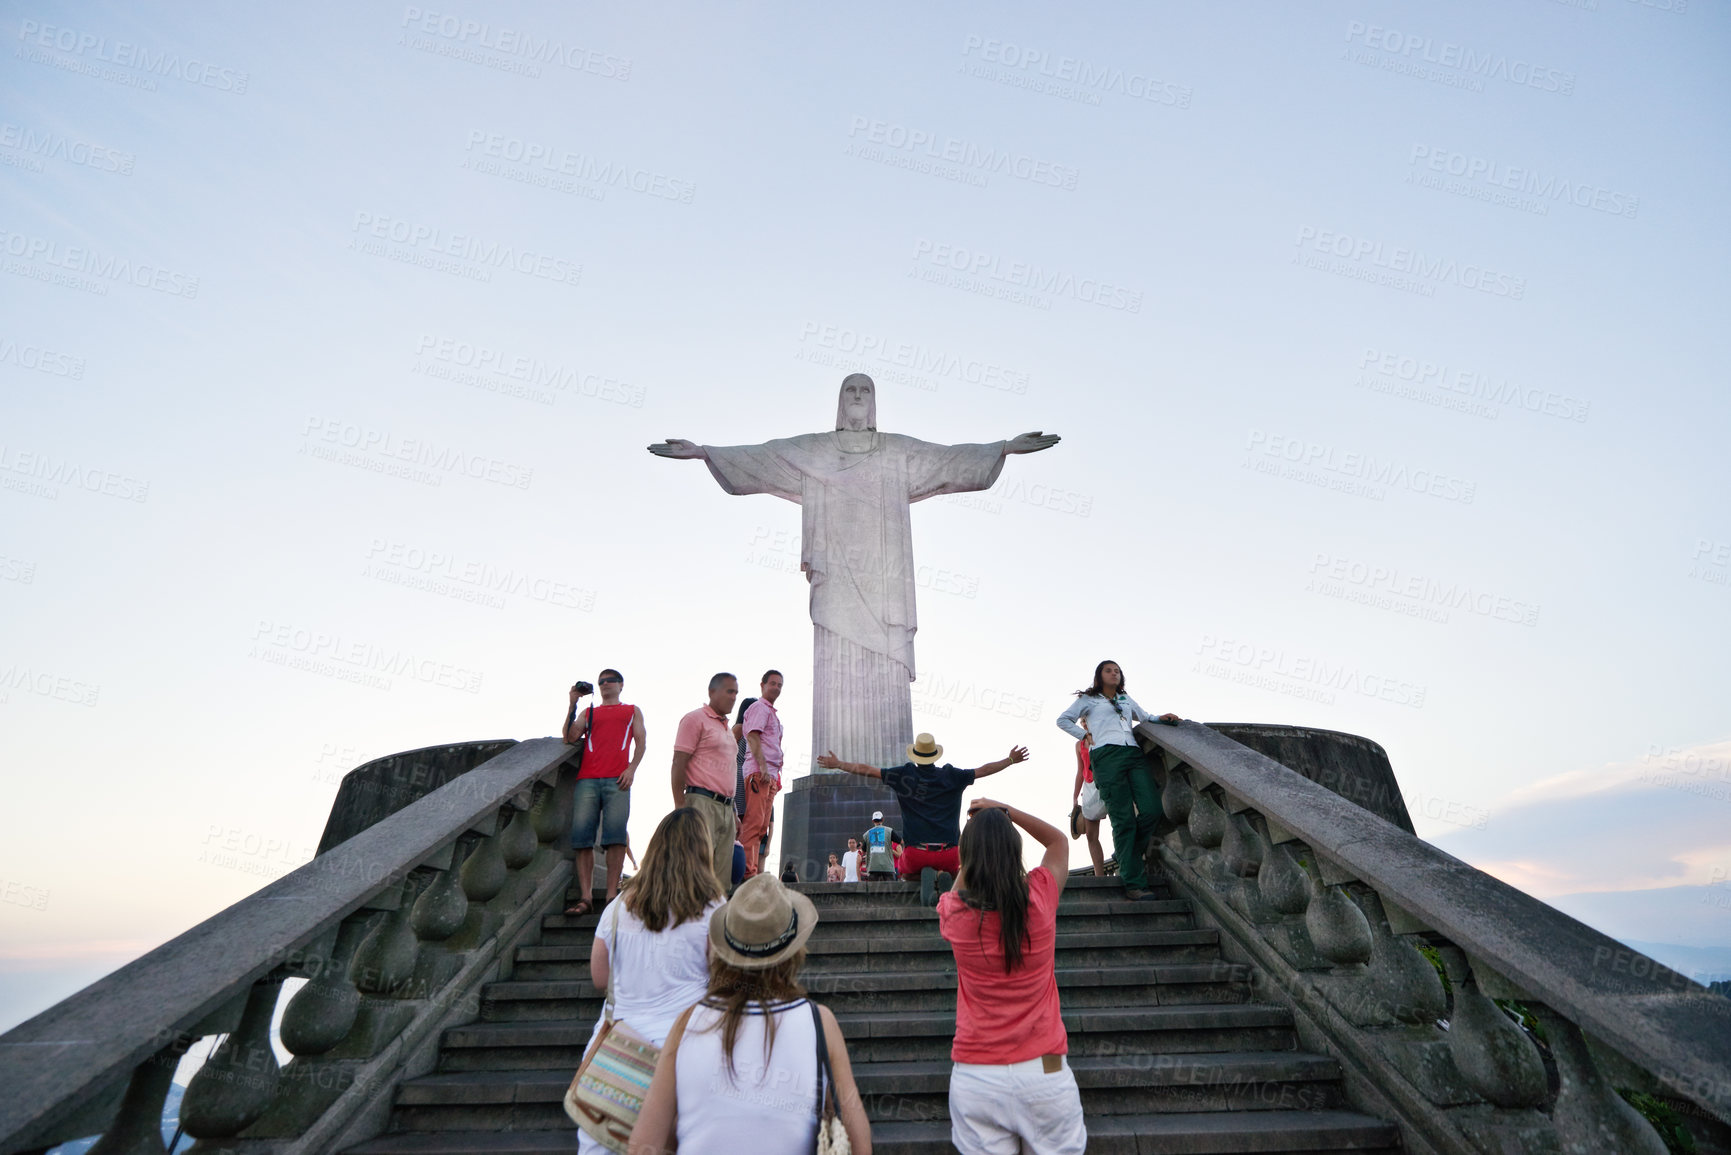 Buy stock photo People, christ and steps with statue for tourism in rio de Janeiro of redeemer, sightseeing or landmark sculpture. Group, community or crowd on tour, trip or monument of iconic attraction in Brazil